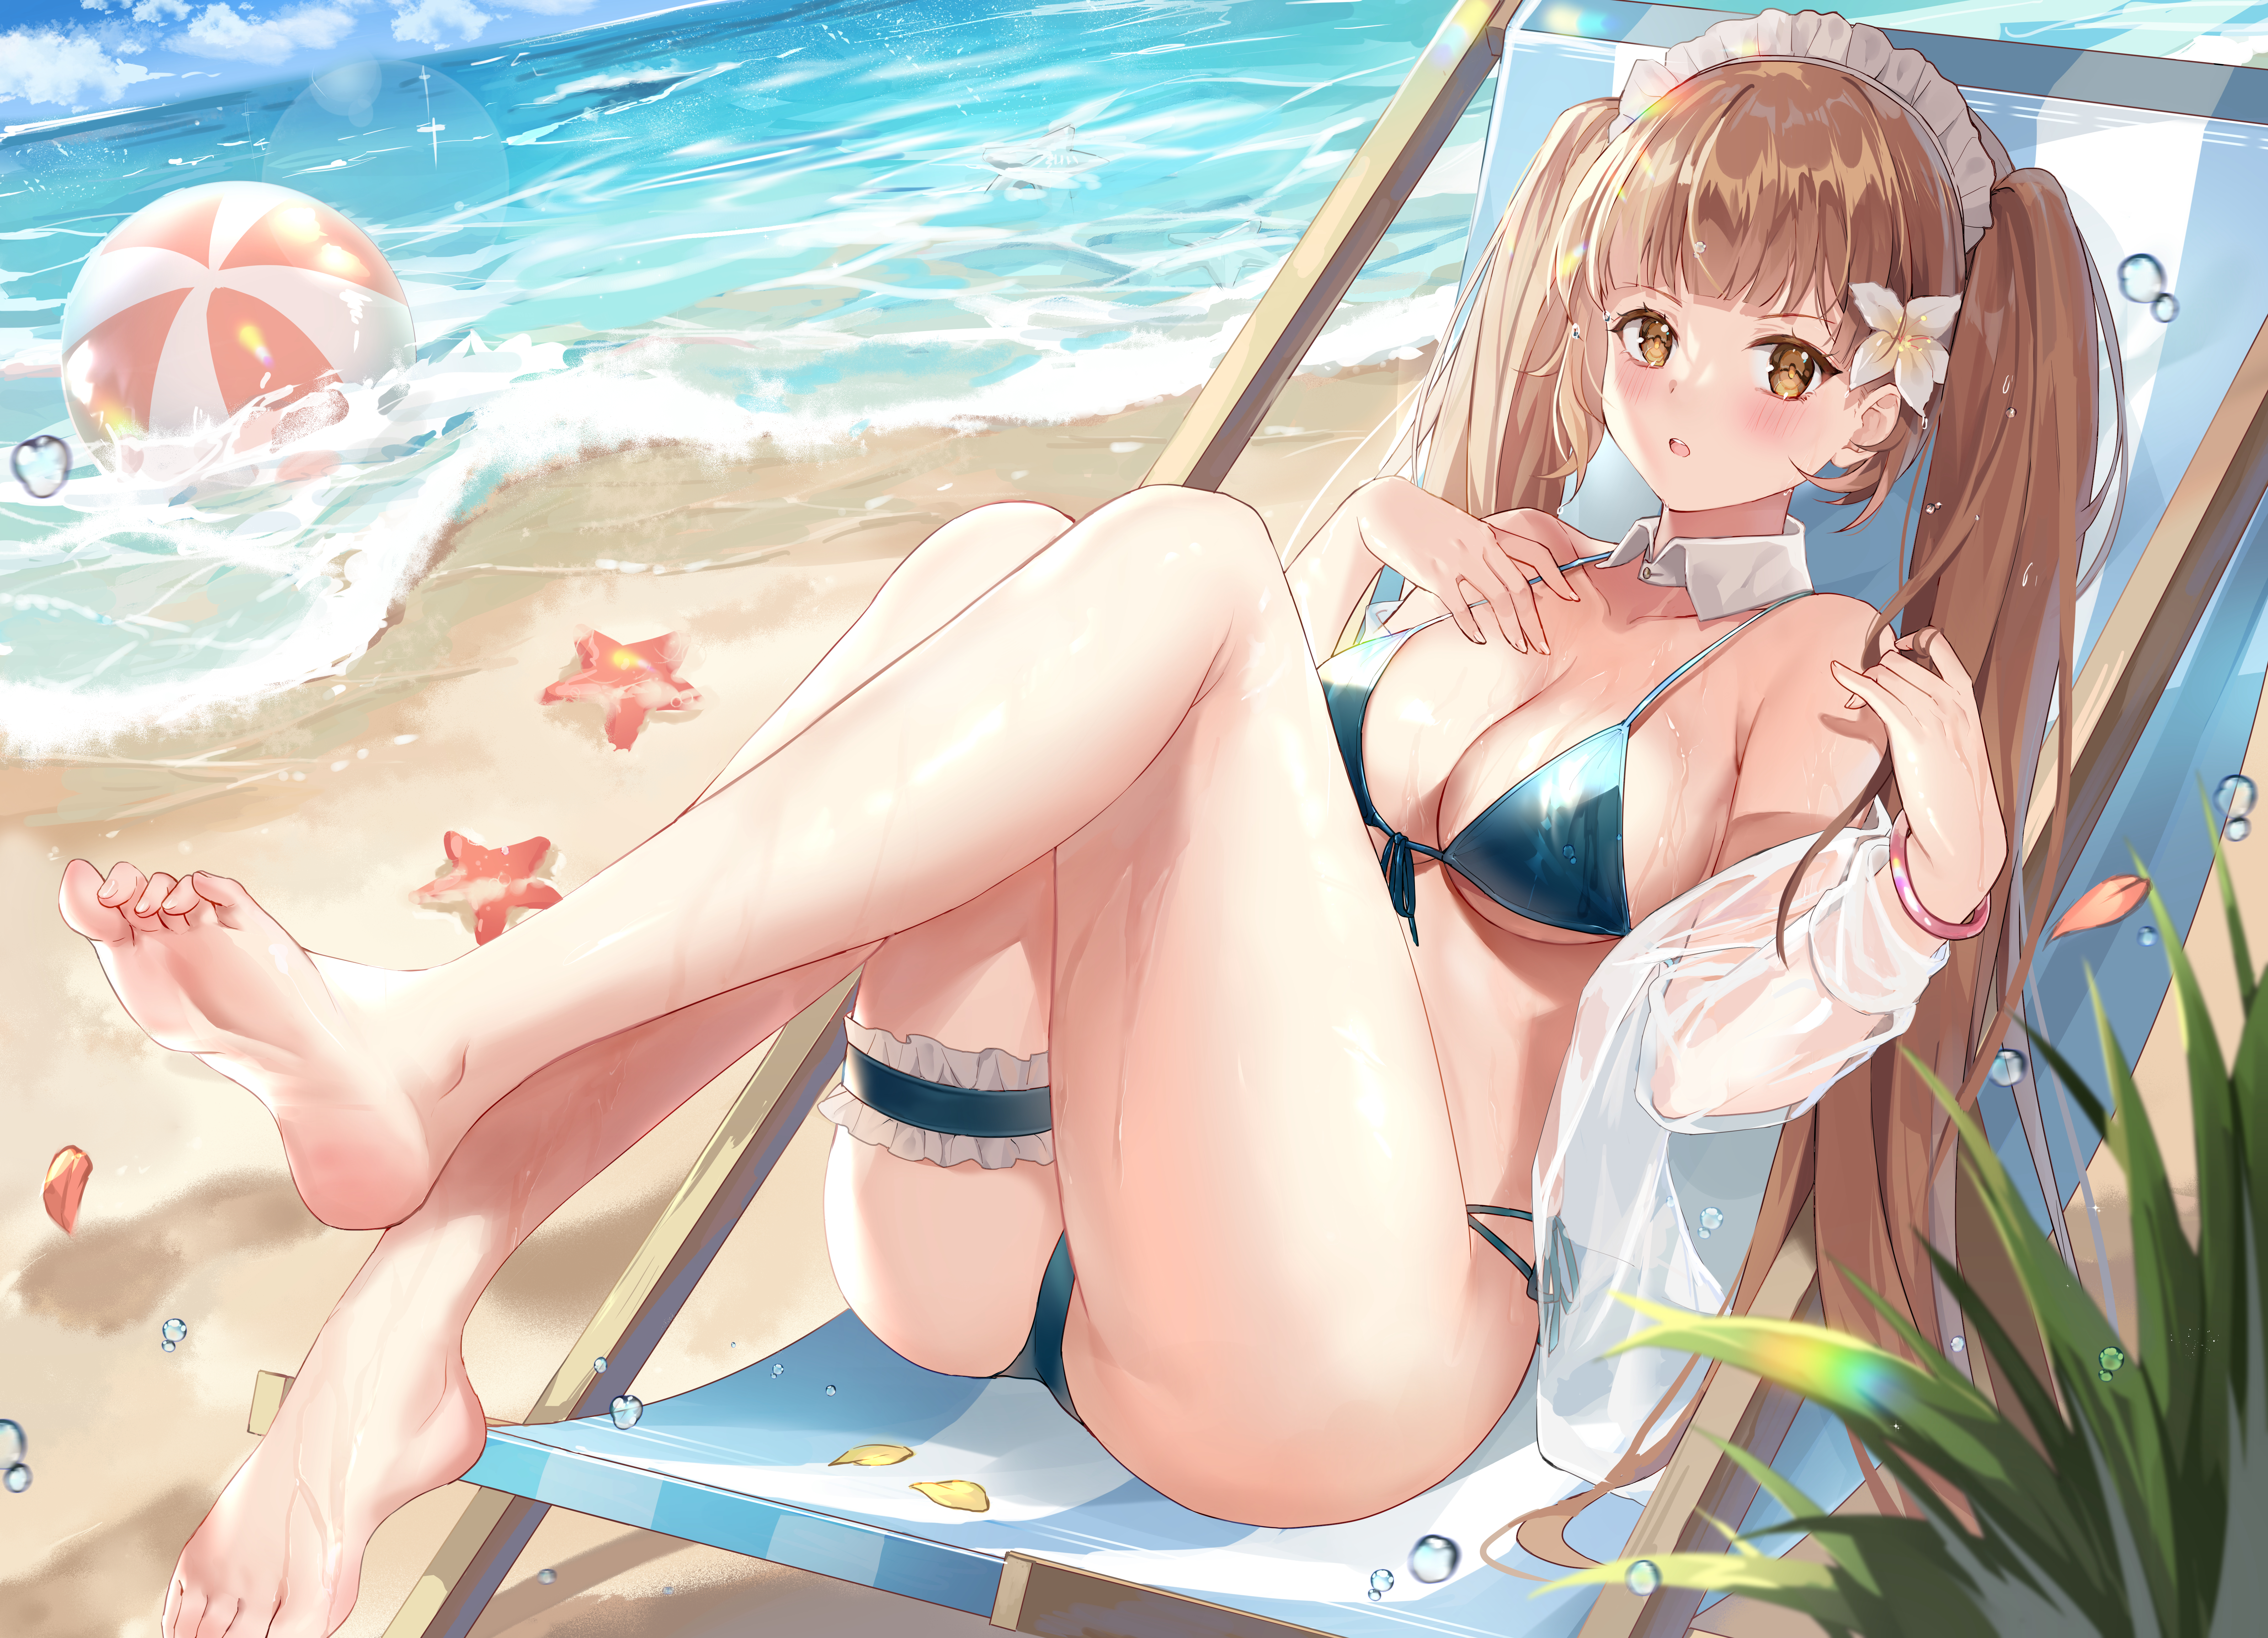 Anime 6378x4606 anime anime girls barefoot beach feet bikini cleavage big boobs maid outfit brunette twintails brown eyes wet Evidence979 artwork beach ball sunbed flower in hair starfish wet body water drops